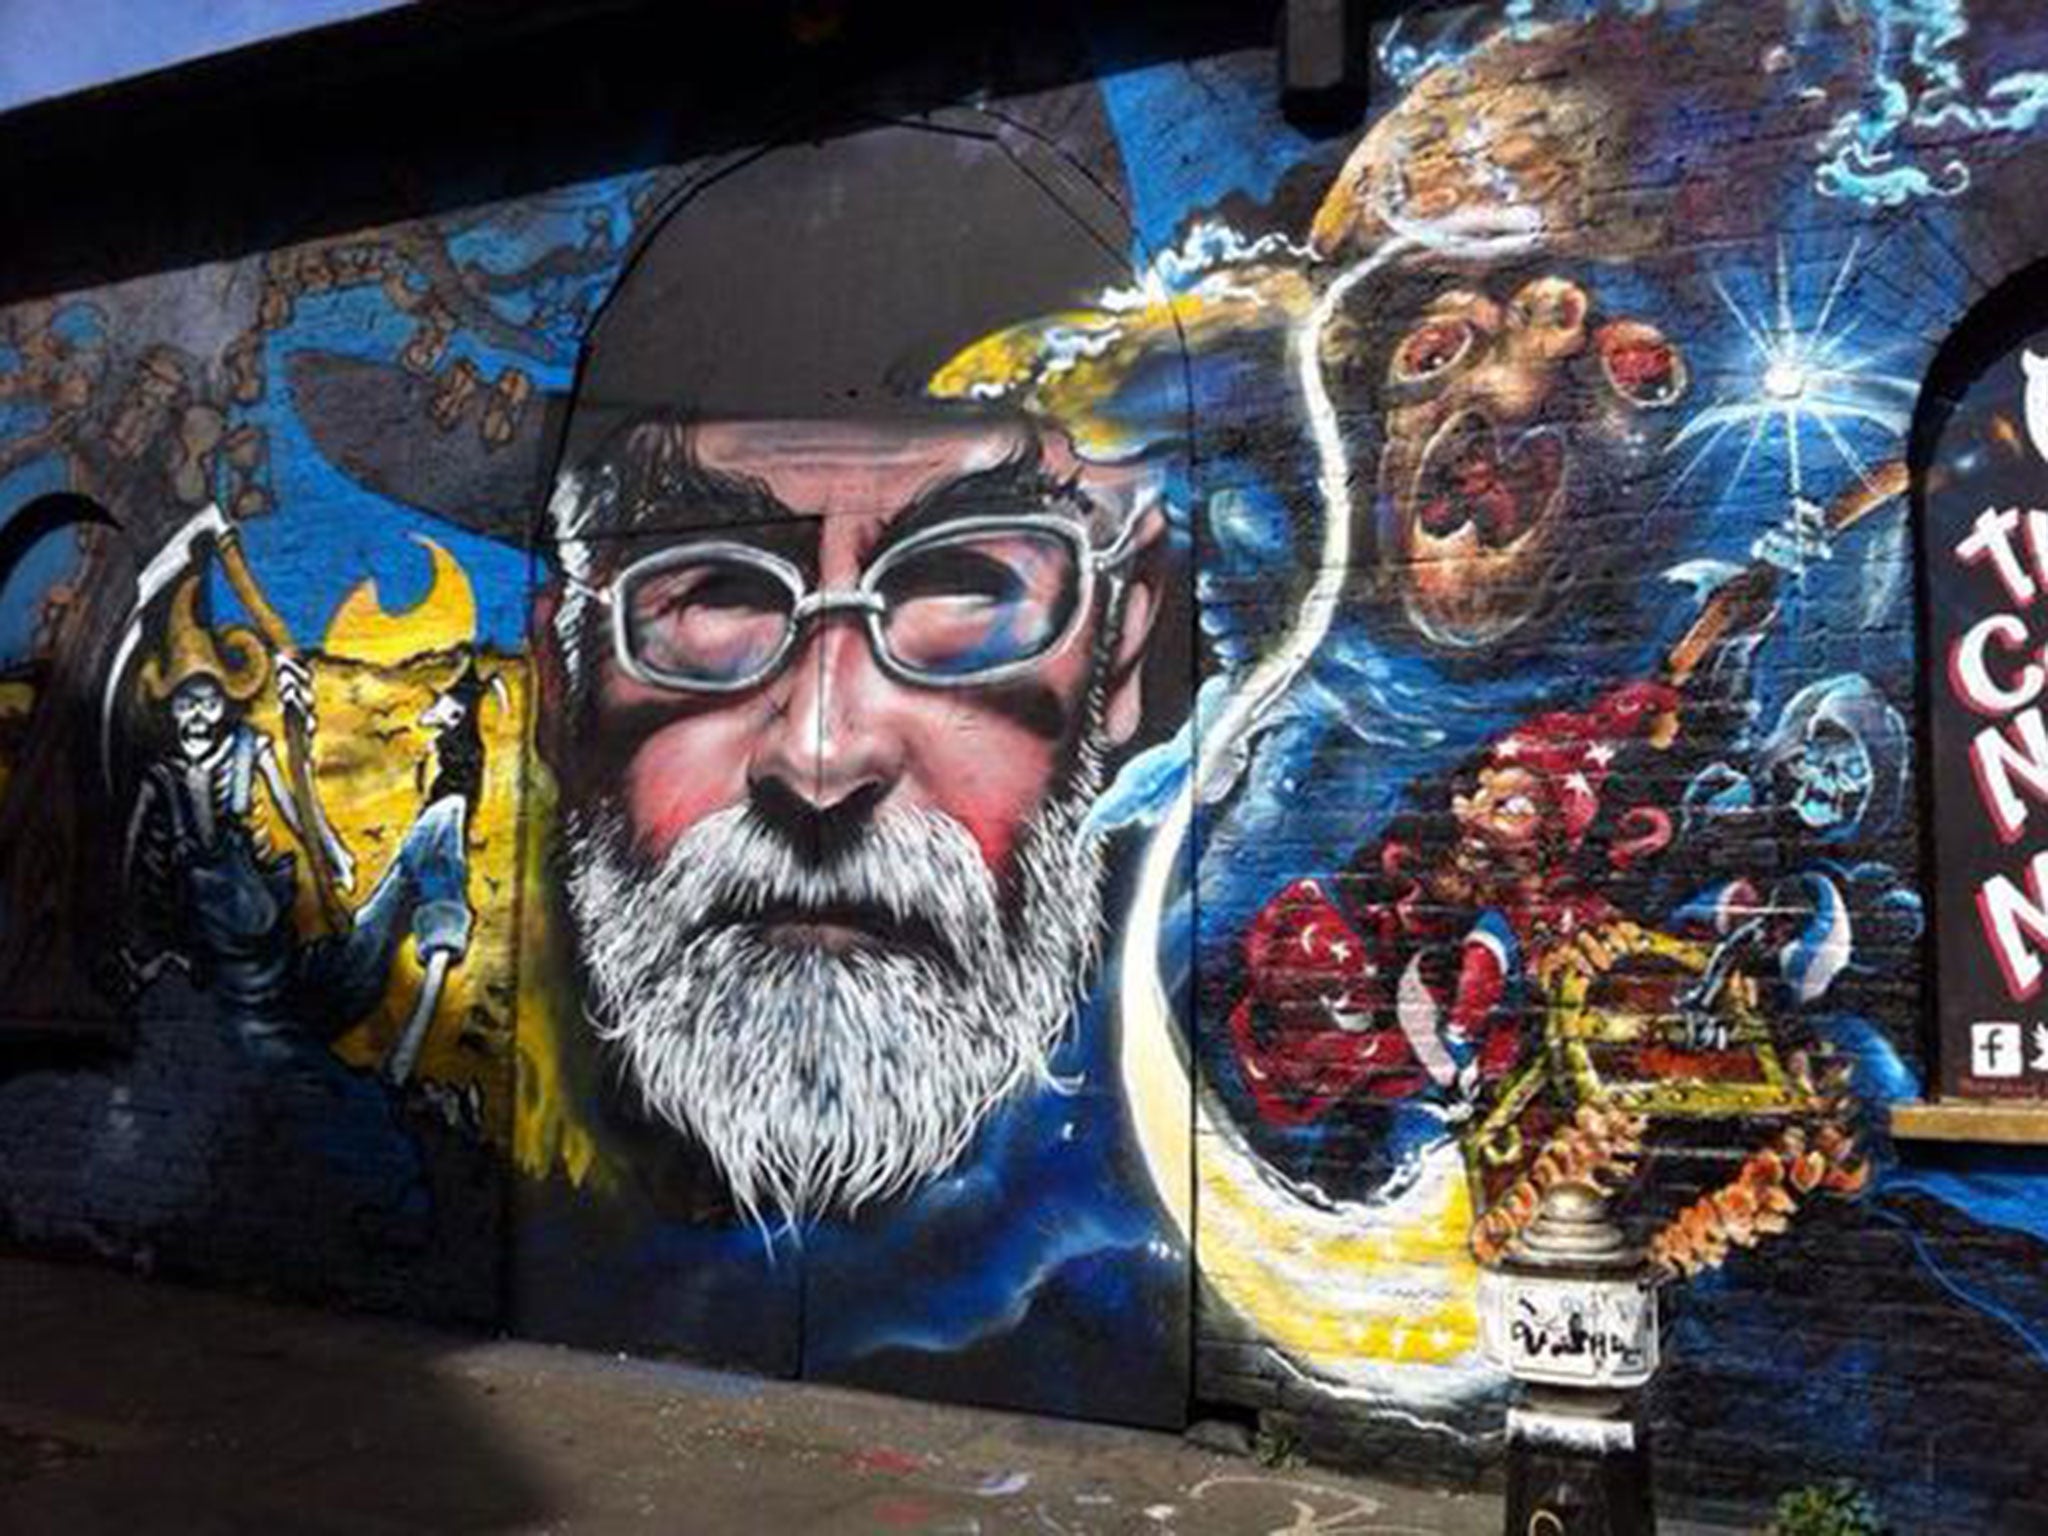 Colourful graffiti tributes to Terry Pratchett can be found in London's East End and Bristol